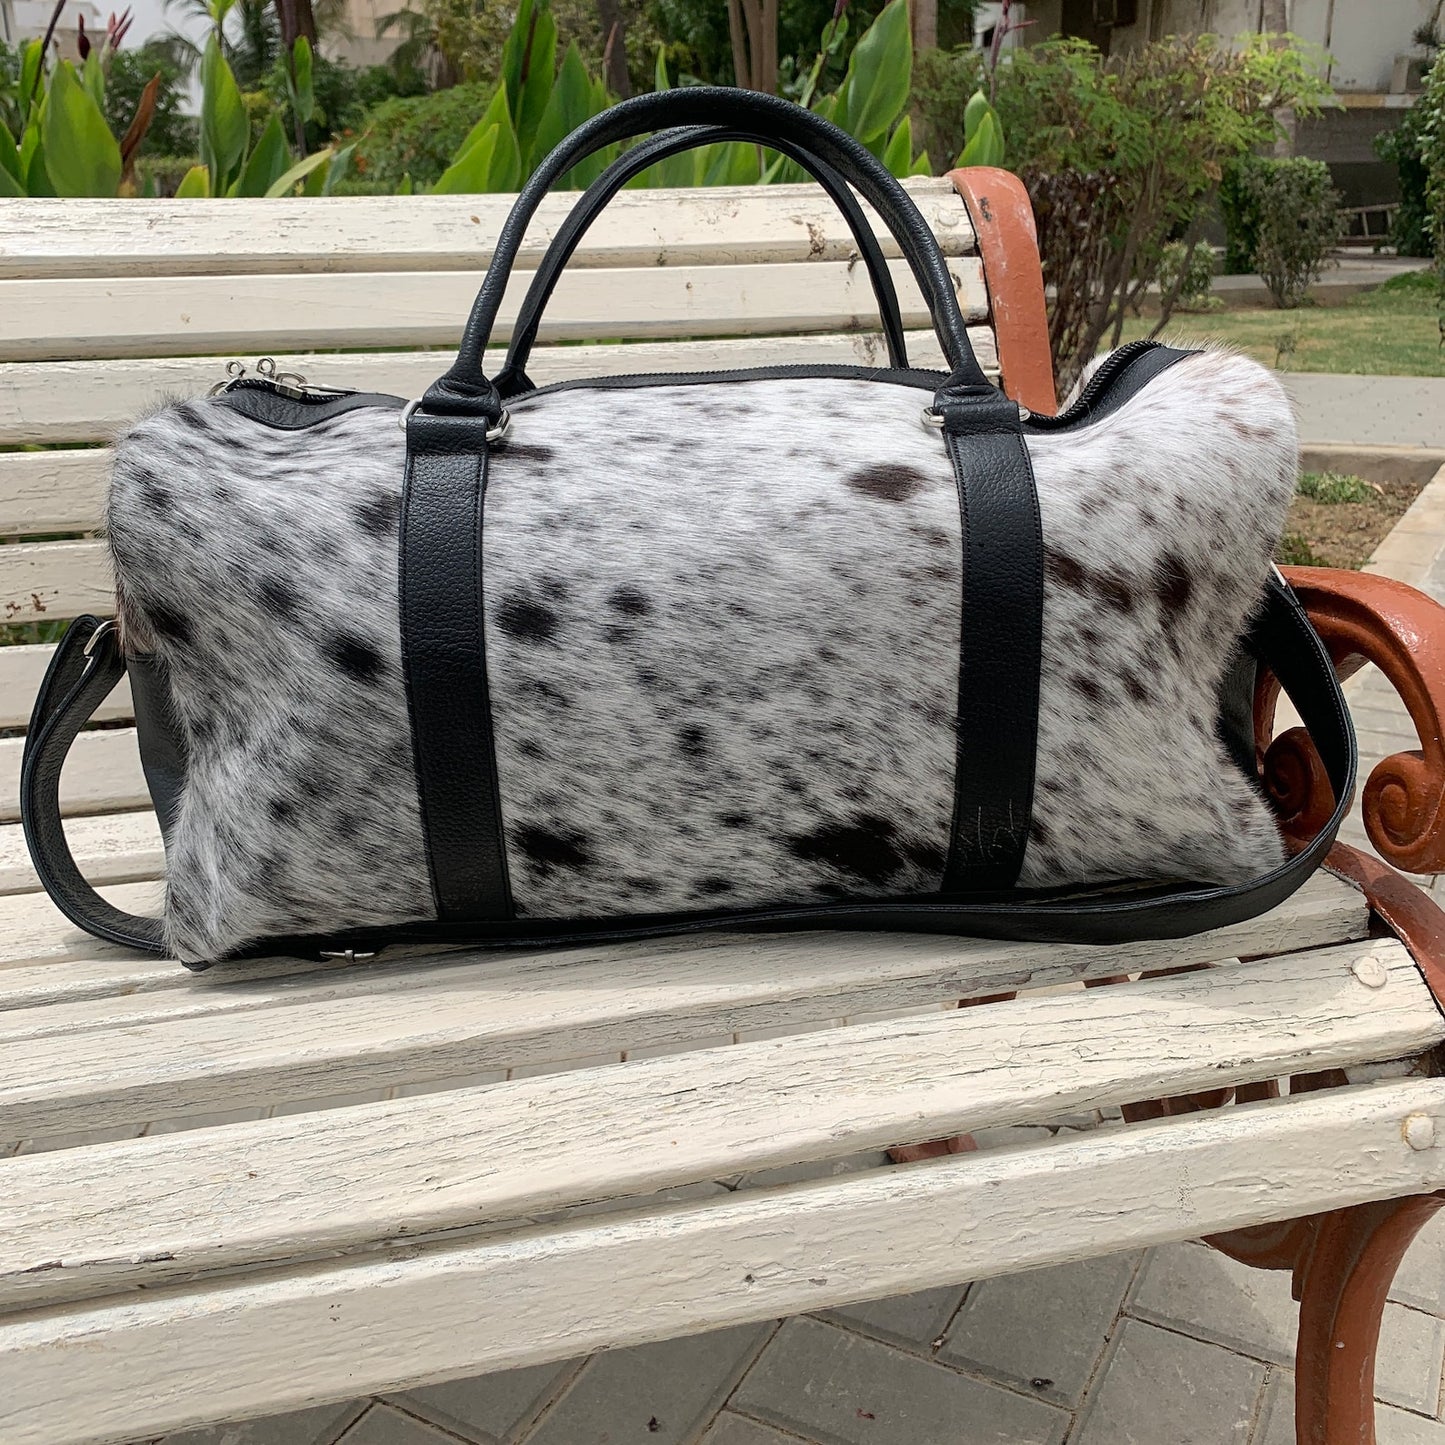 Elevate your escapades with this cow skin weekender bag, a symbol of wanderlust and refined taste for the modern traveler.